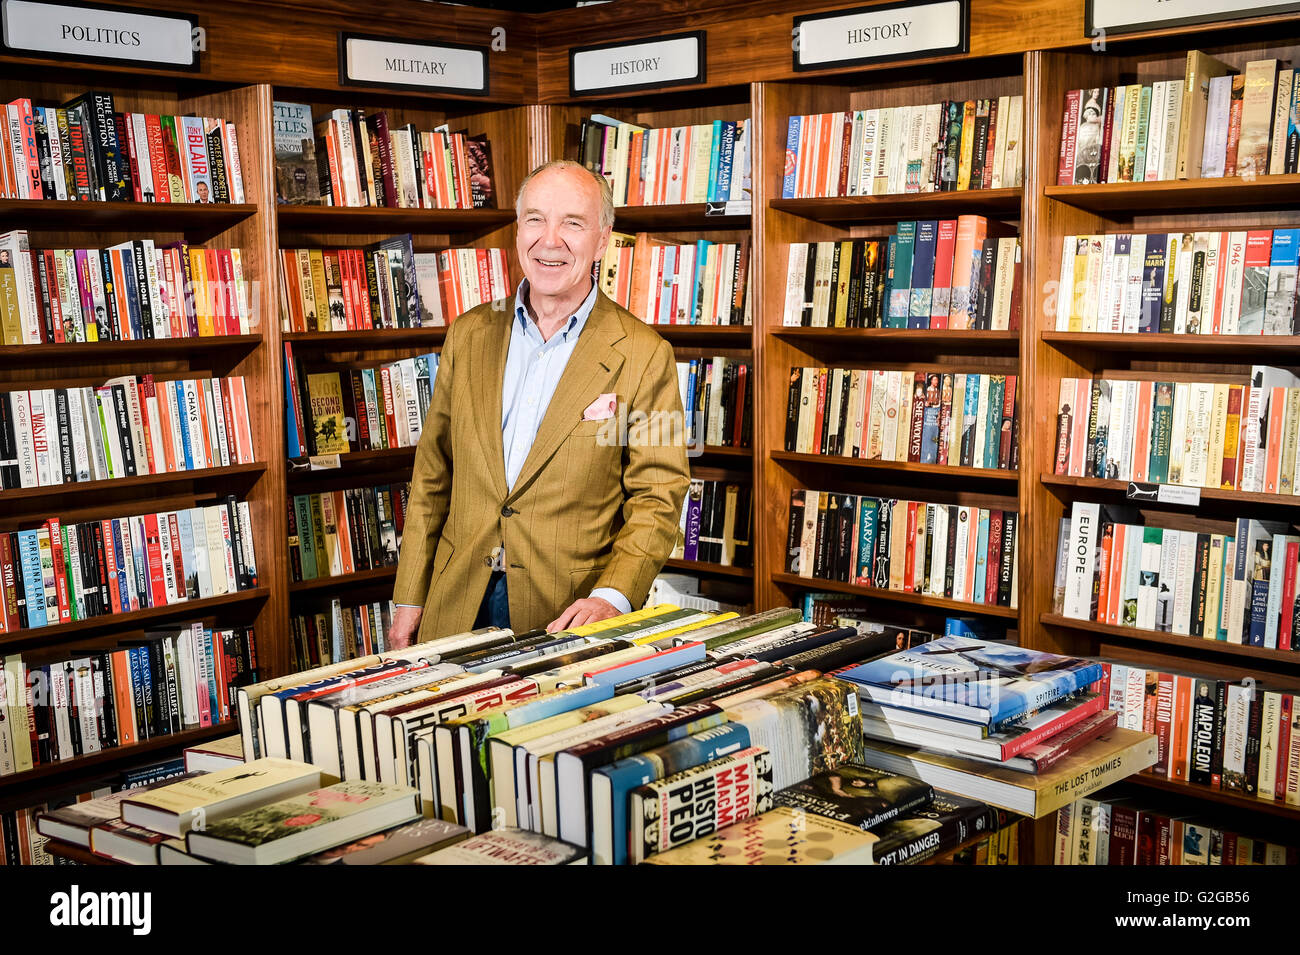 Robert Hiscox in his White Horse Bookshop in Marlborough, Wiltshire, as the city grandee has launched a blistering attack on David Cameron's campaign to remain in the EU, dubbing it 'corrupt' and accusing the Treasury of disseminating 'illegal propaganda'. Stock Photo